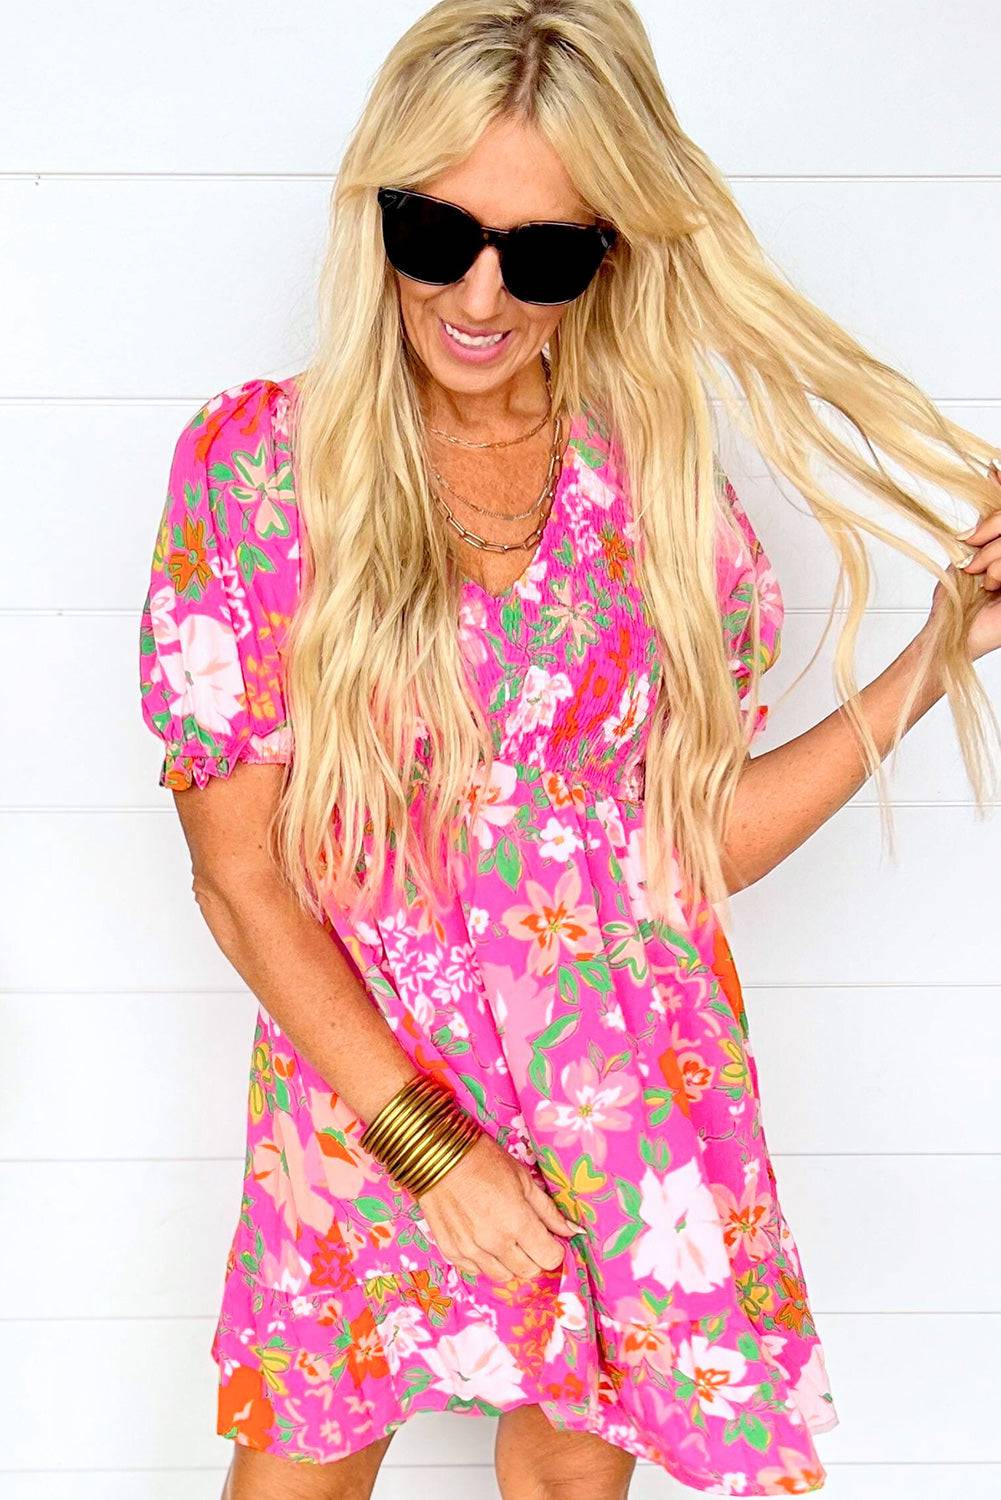 a woman with long blonde hair wearing a pink floral dress